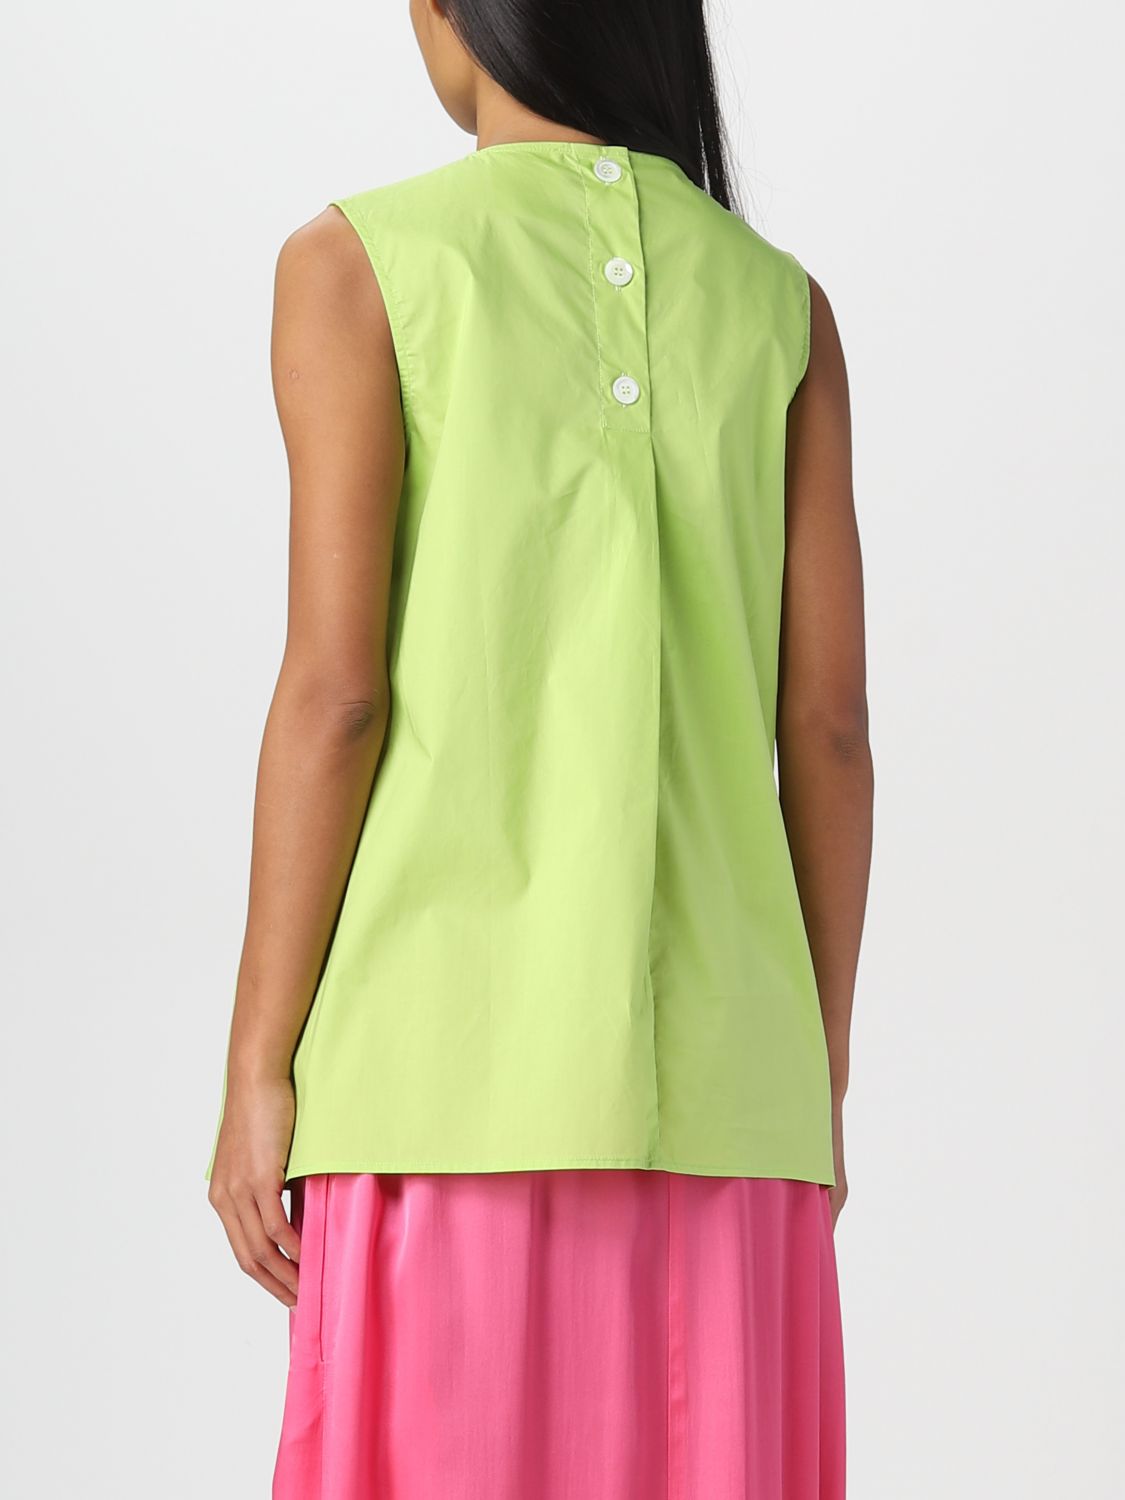 Top Semicouture: Top Semicouture para mujer verde 2